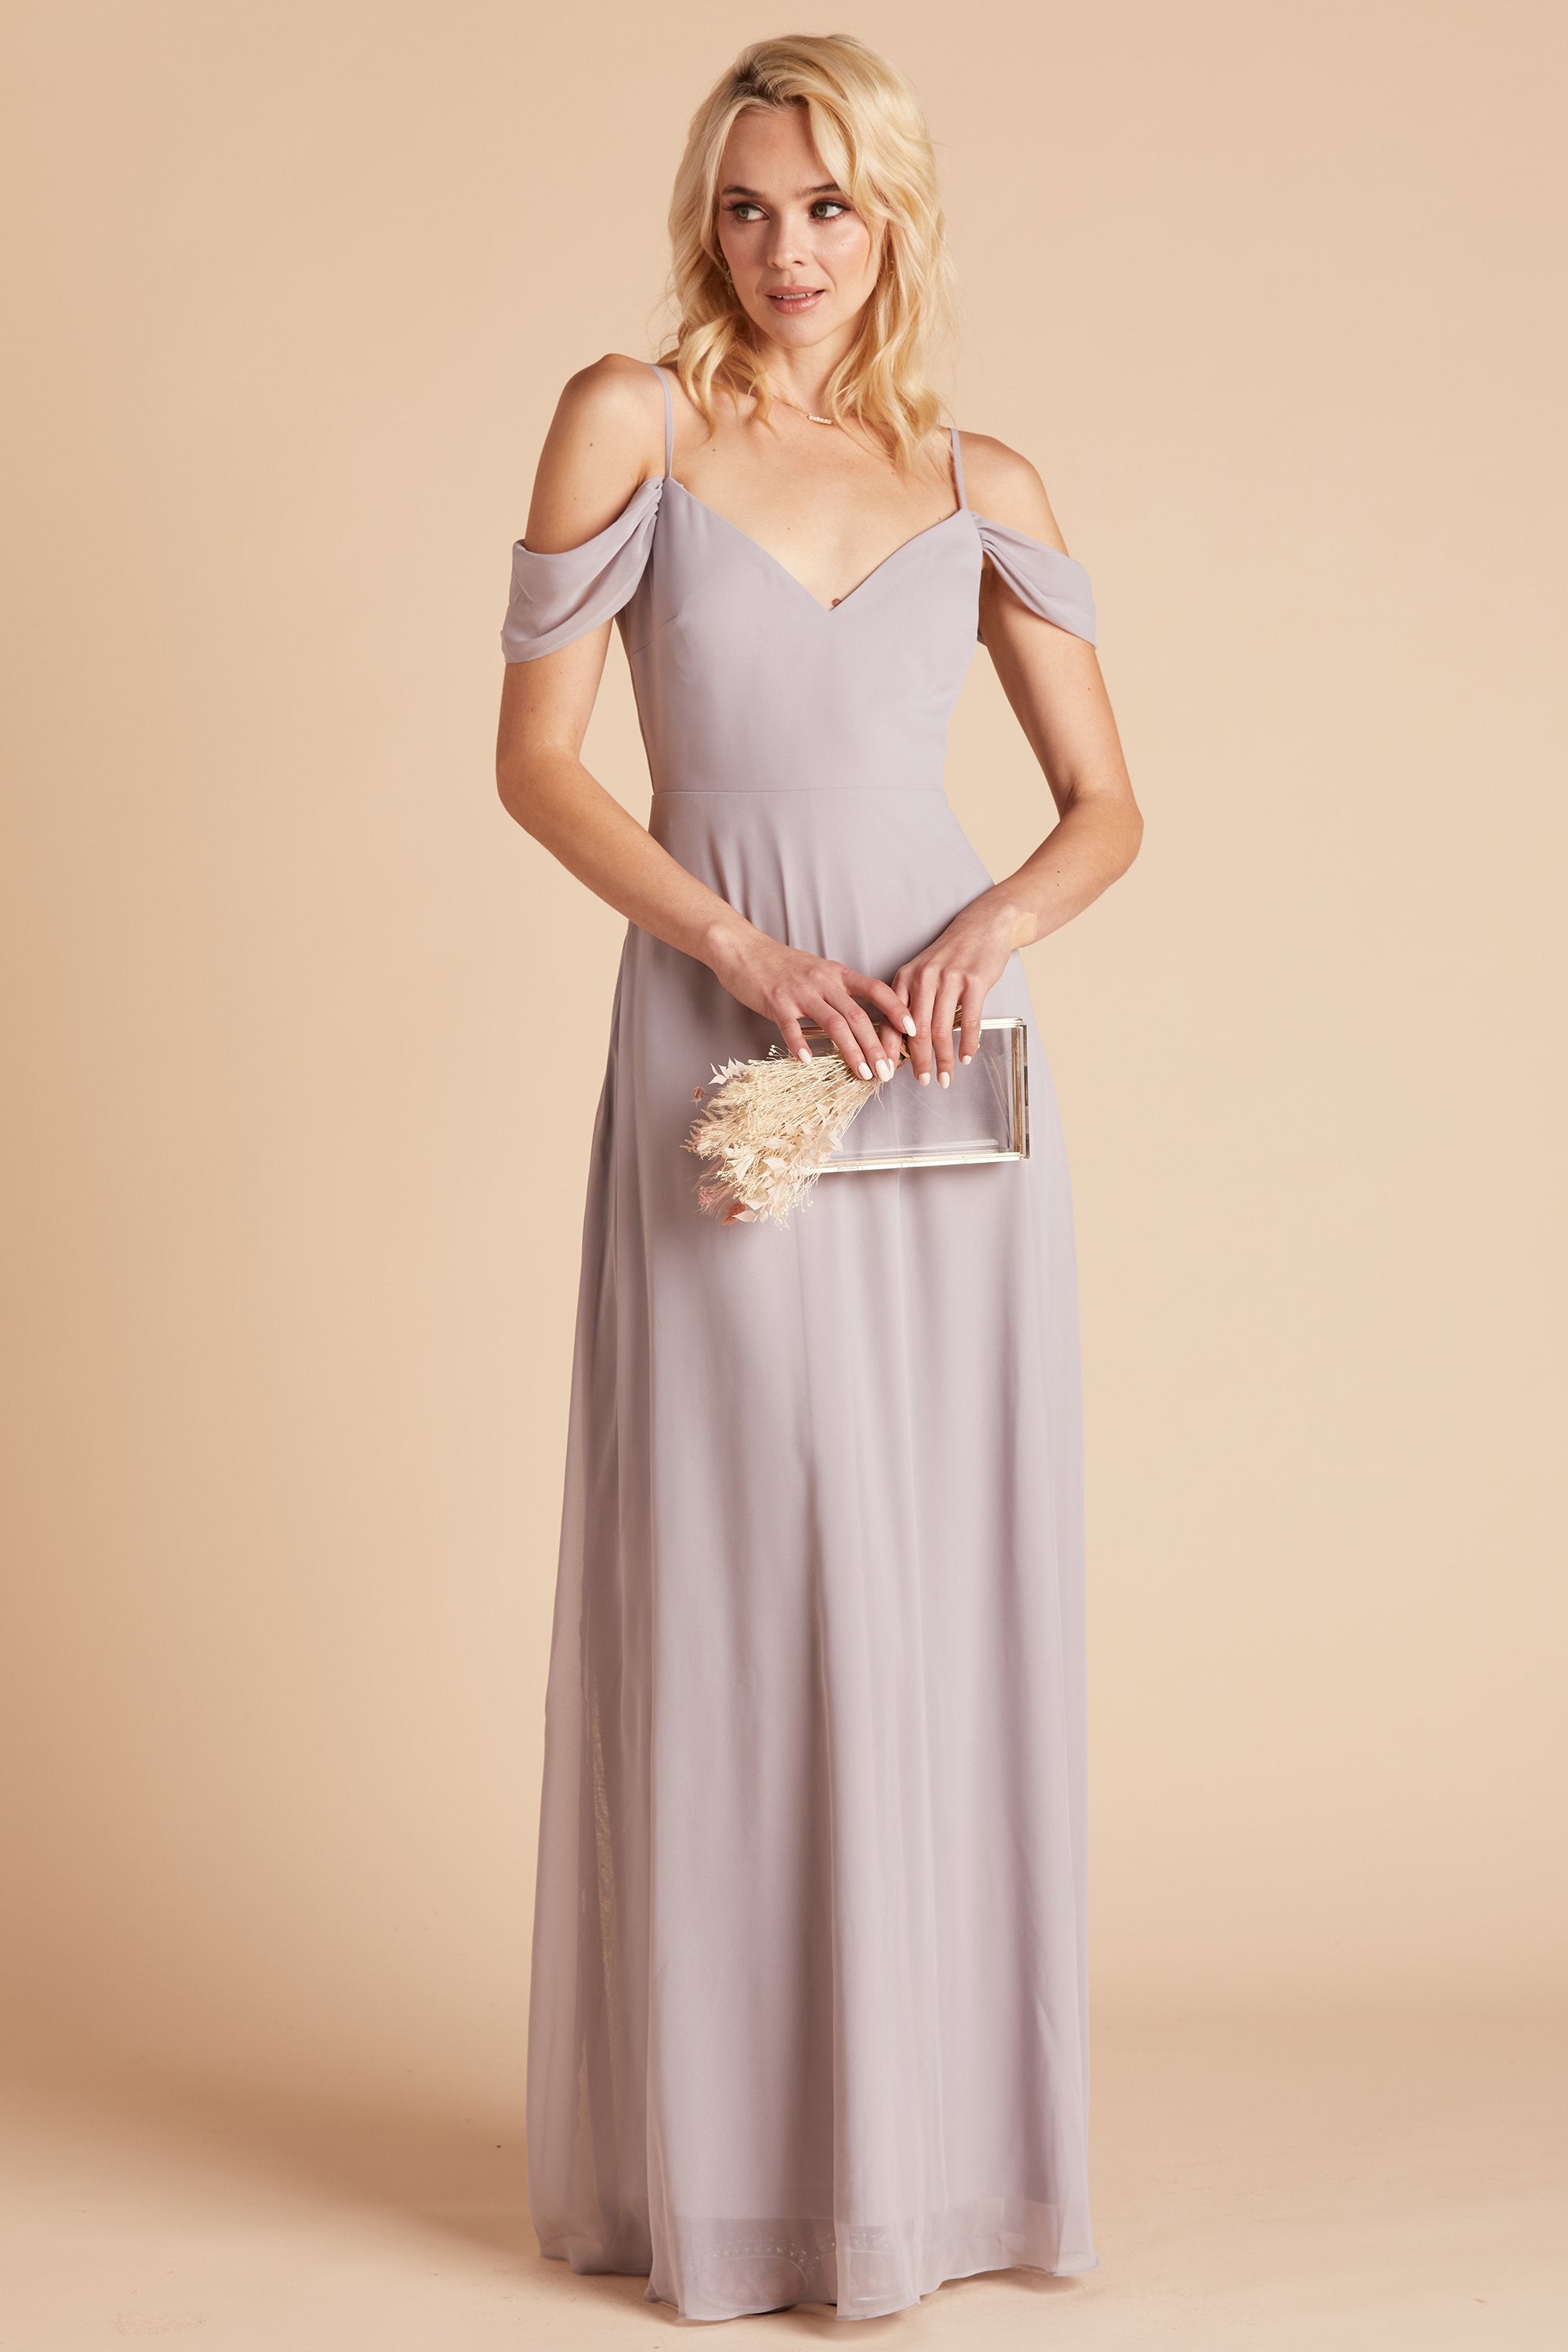 Devin convertible bridesmaids dress in lilac purple chiffon by Birdy Grey, front view